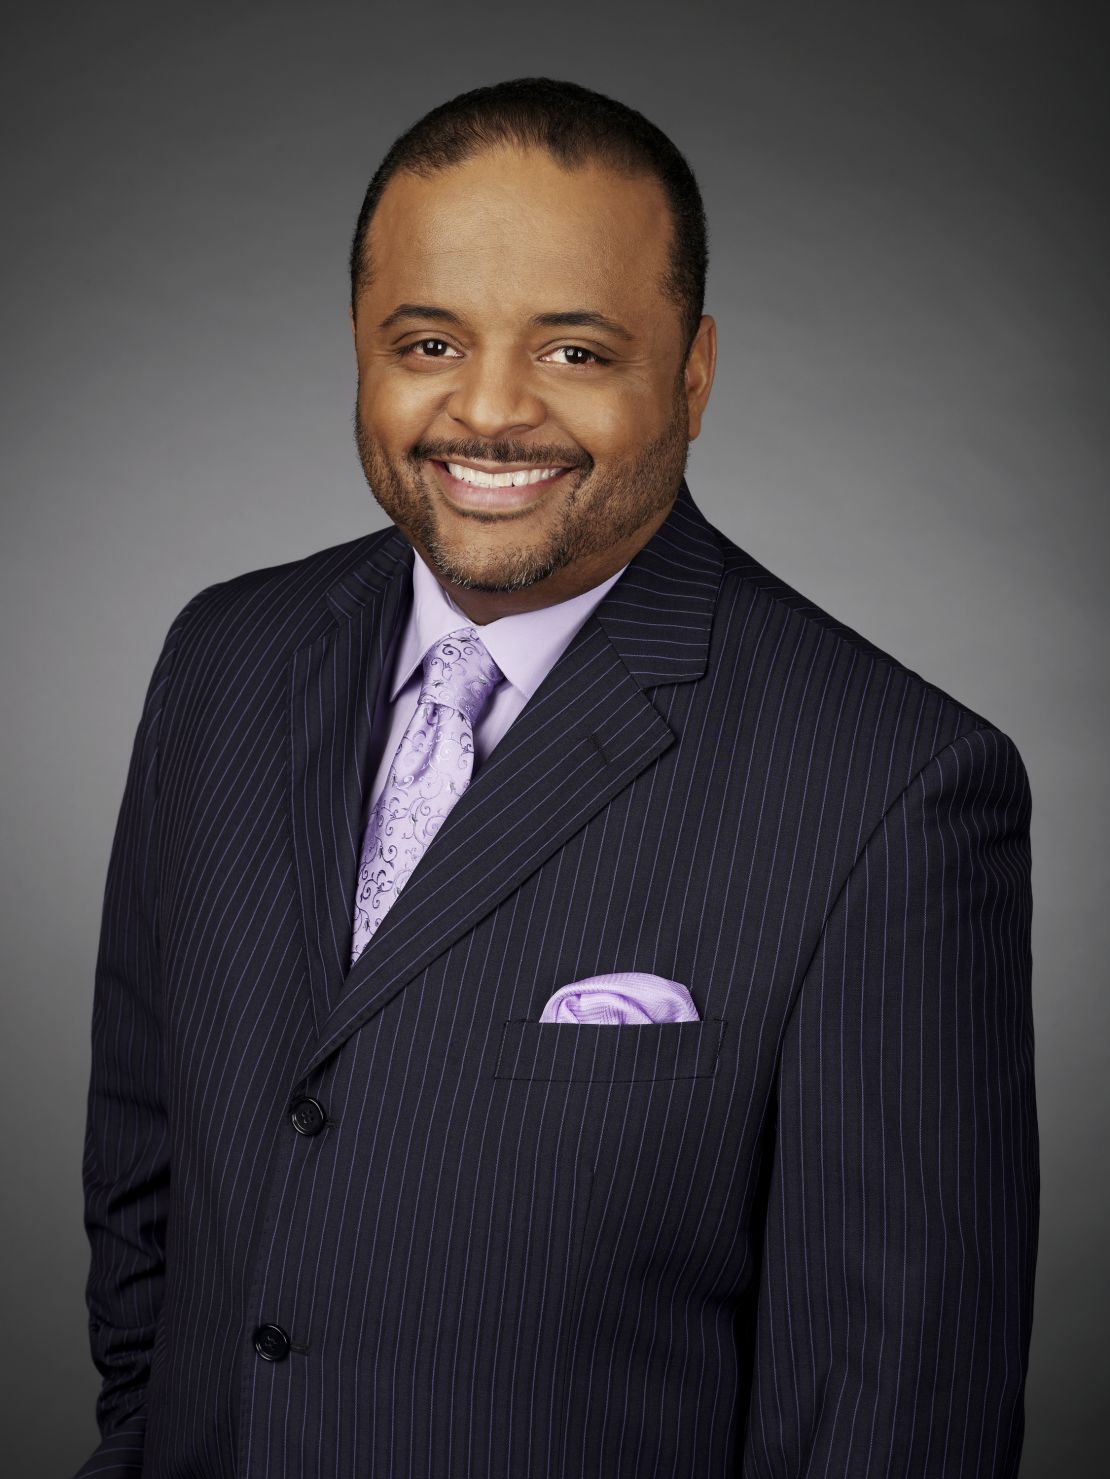 Roland Martin launches new Black TV Network - African American